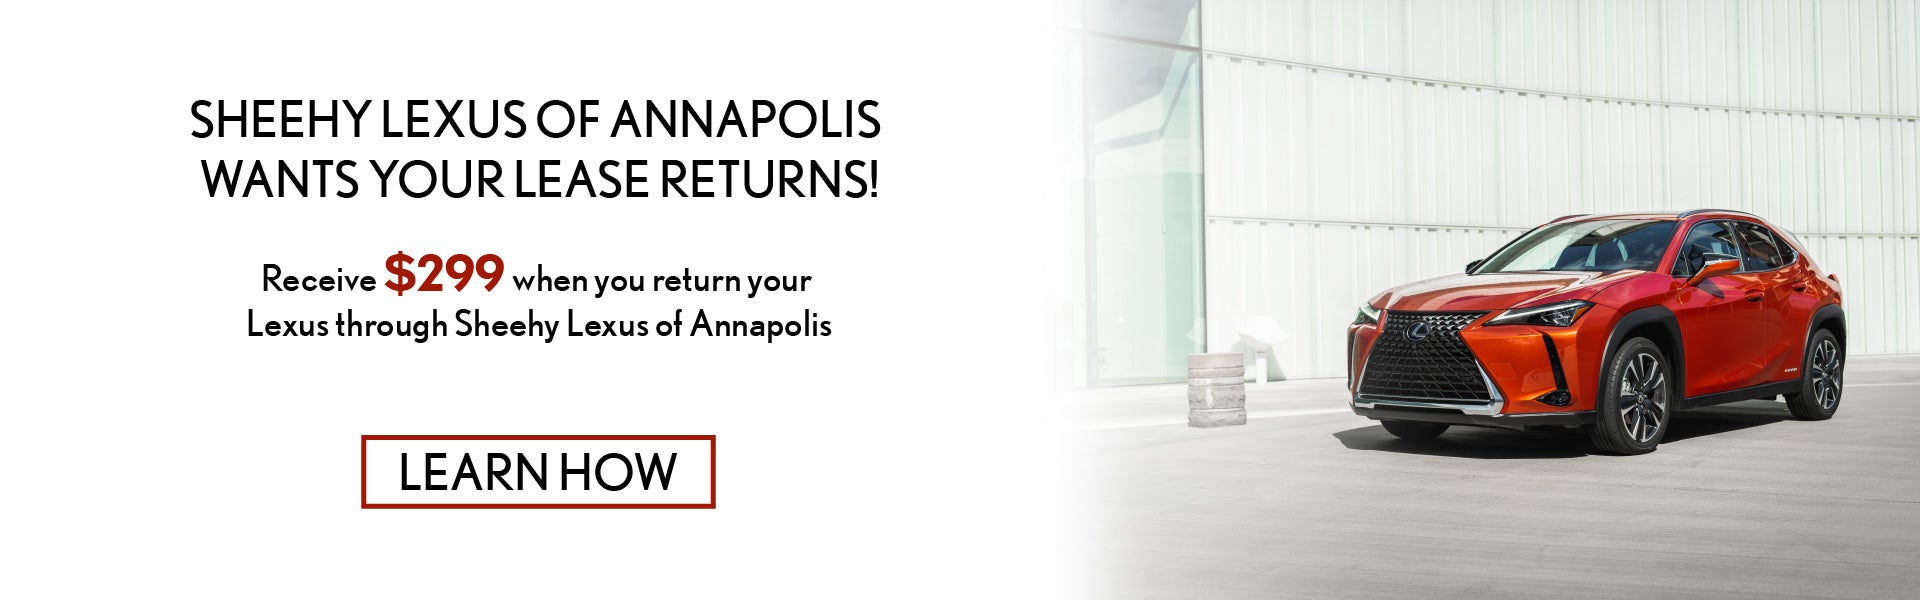 Sheehy Lexus of Annapolis Lease Returns_$299 Incentive